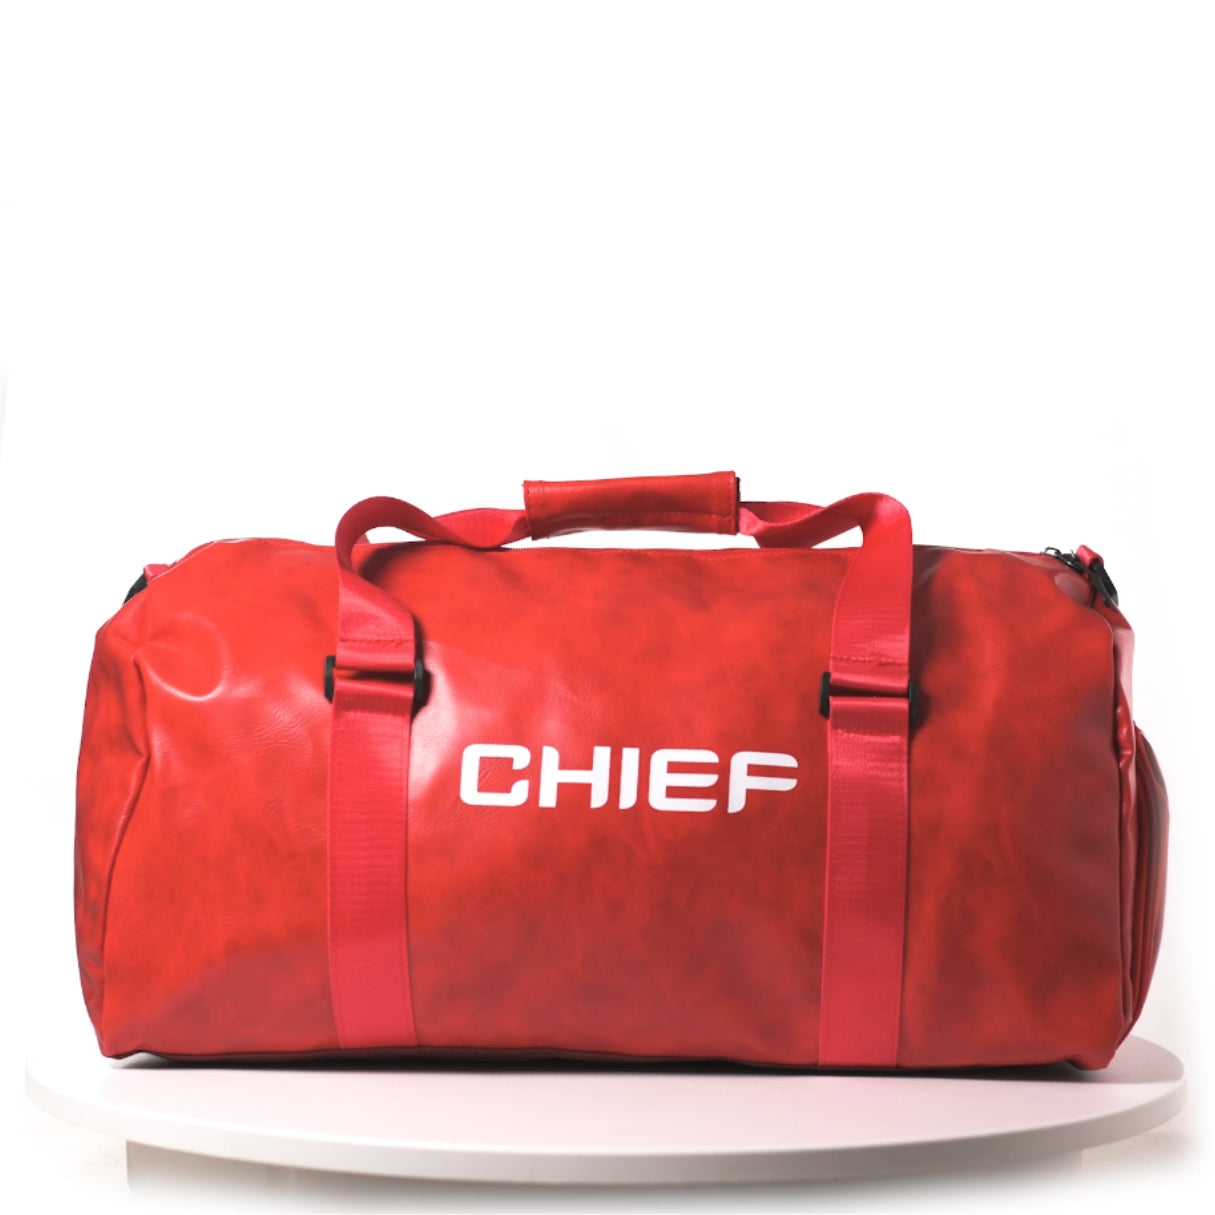 Chief Duffle Bag Red